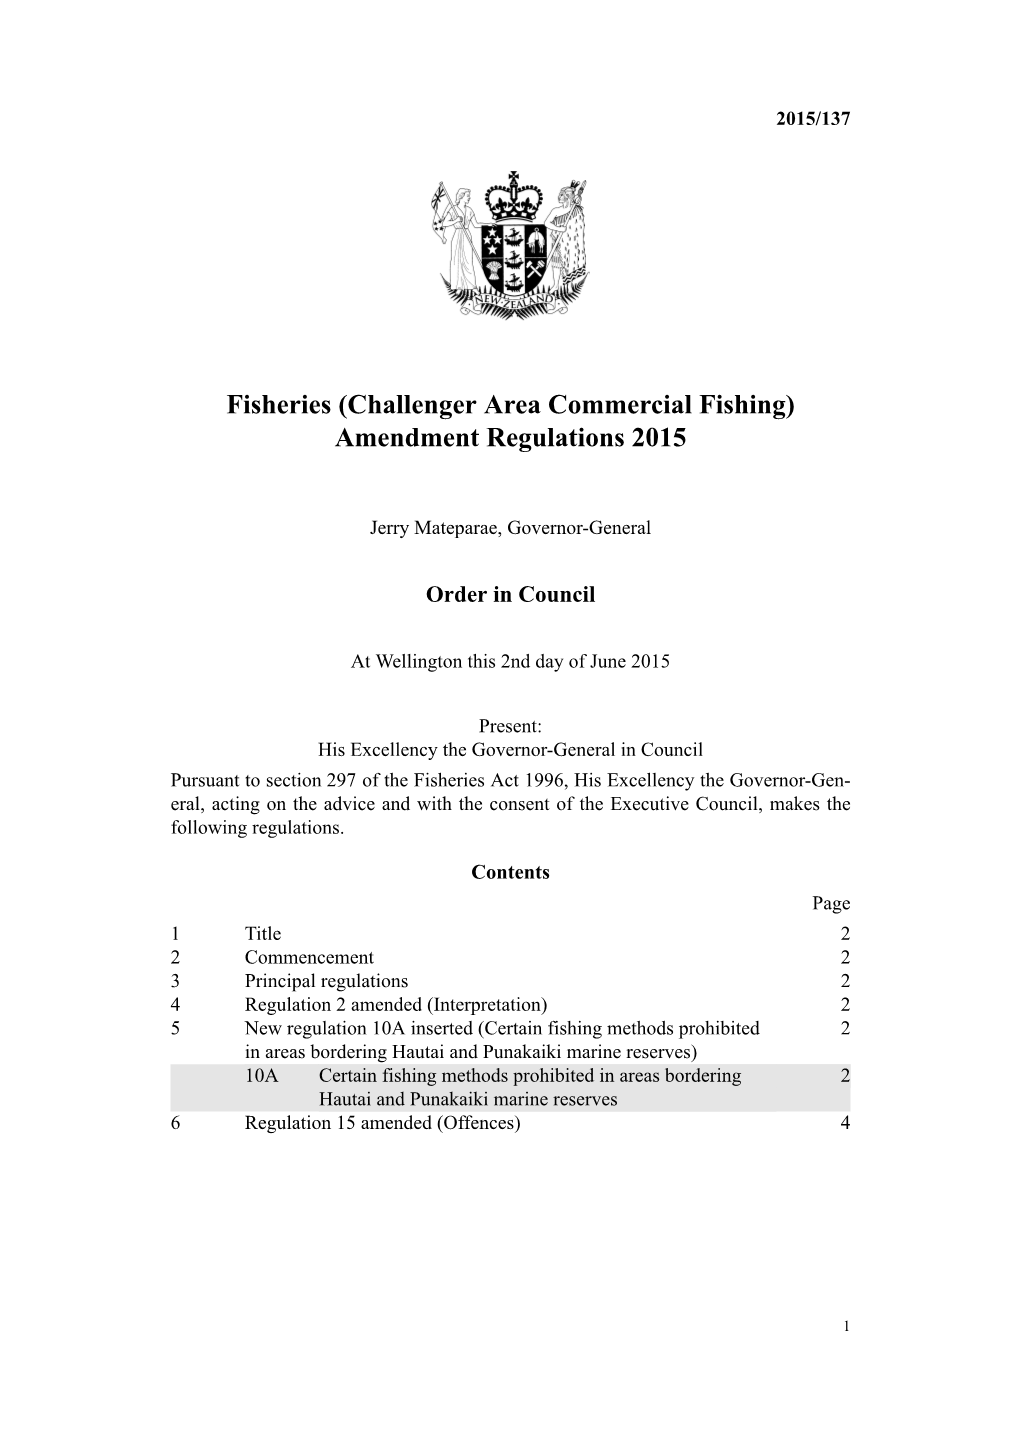 Fisheries (Challenger Area Commercial Fishing) Amendment Regulations 2015